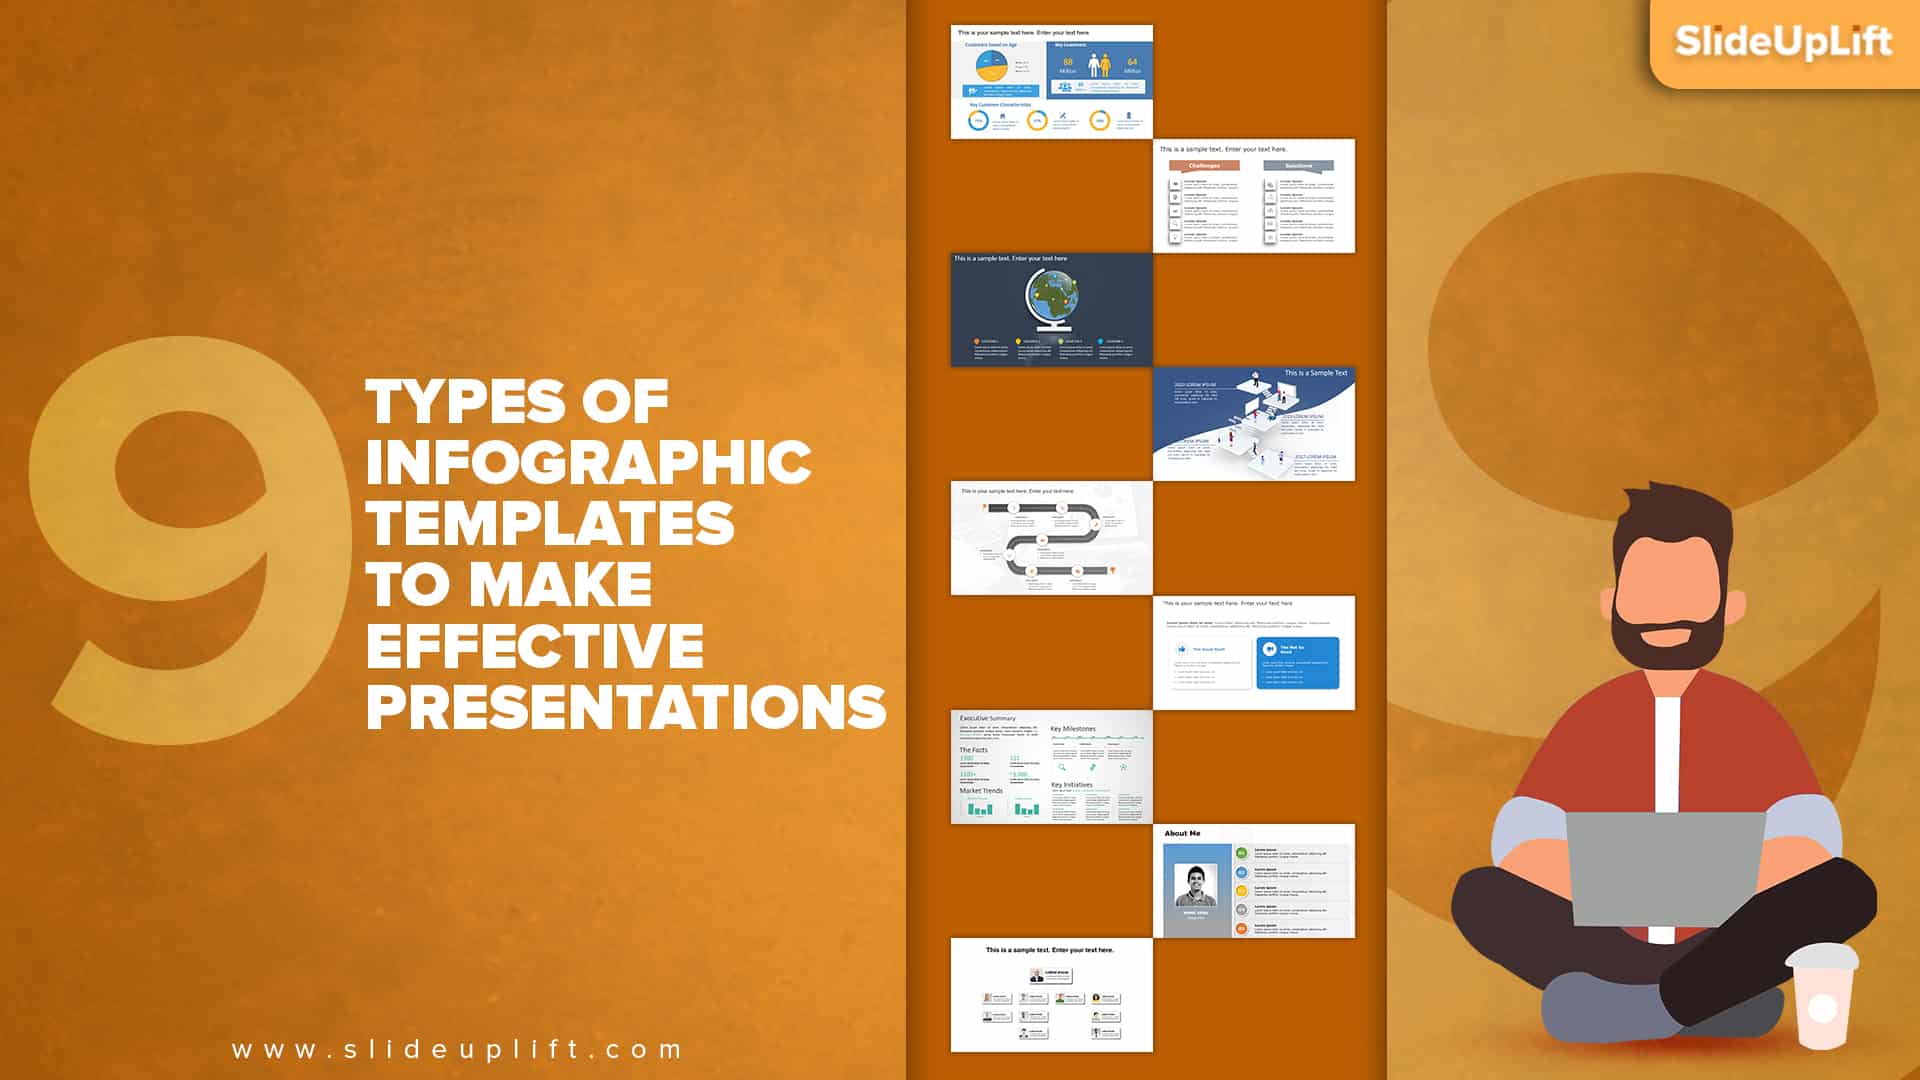 9 Types of Infographic Templates To Make Effective Presentations (A Few  Infographic Examples + Free Templates)